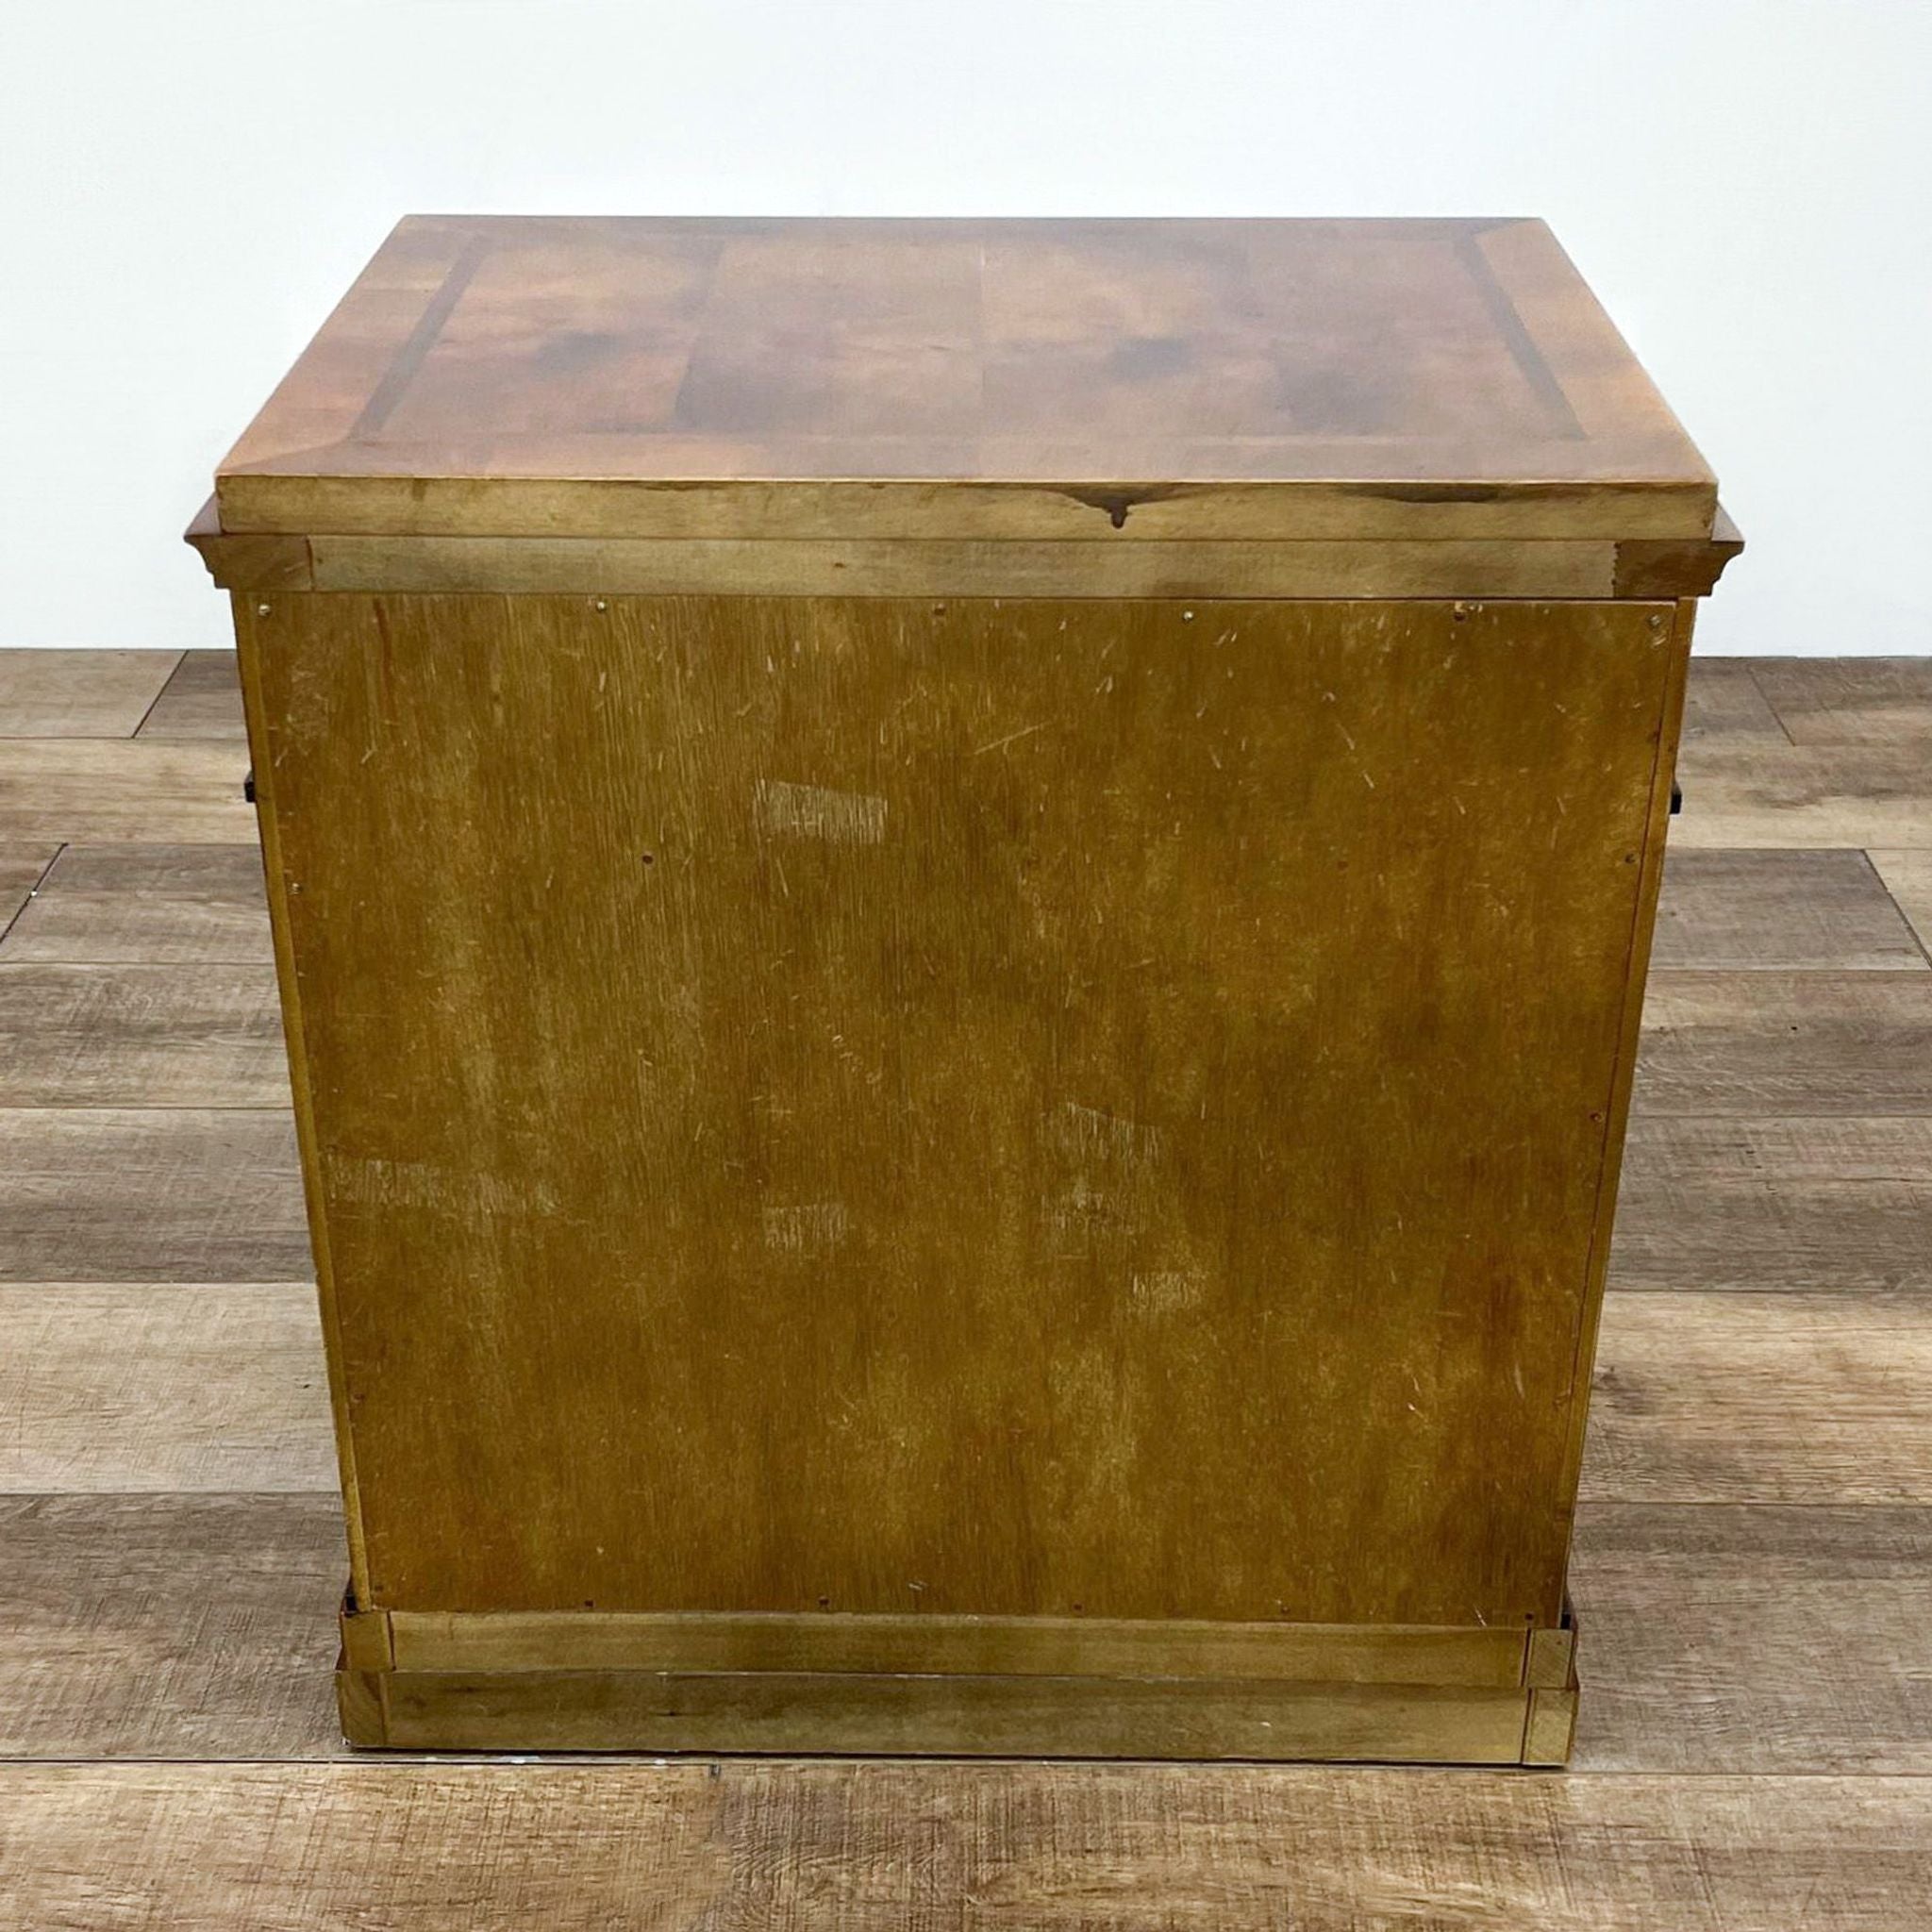 Century Furniture end table featuring two-tone design and inlaid top, viewed from side angle.